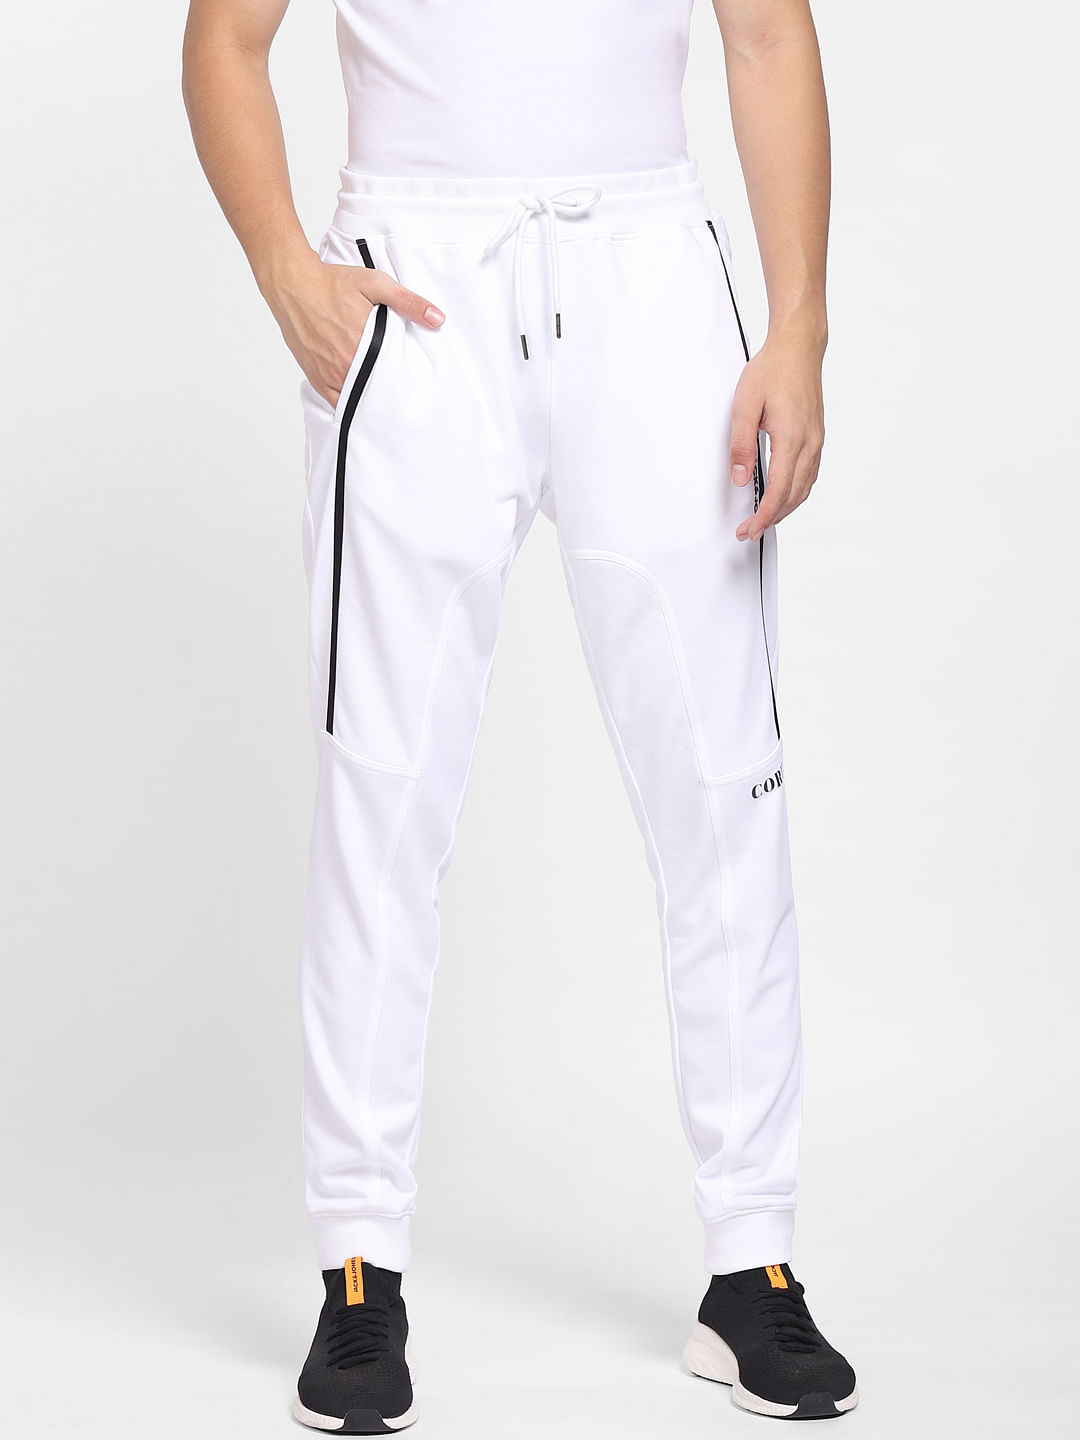 Mens Relax Track Pants - 5932 - AS Colour US